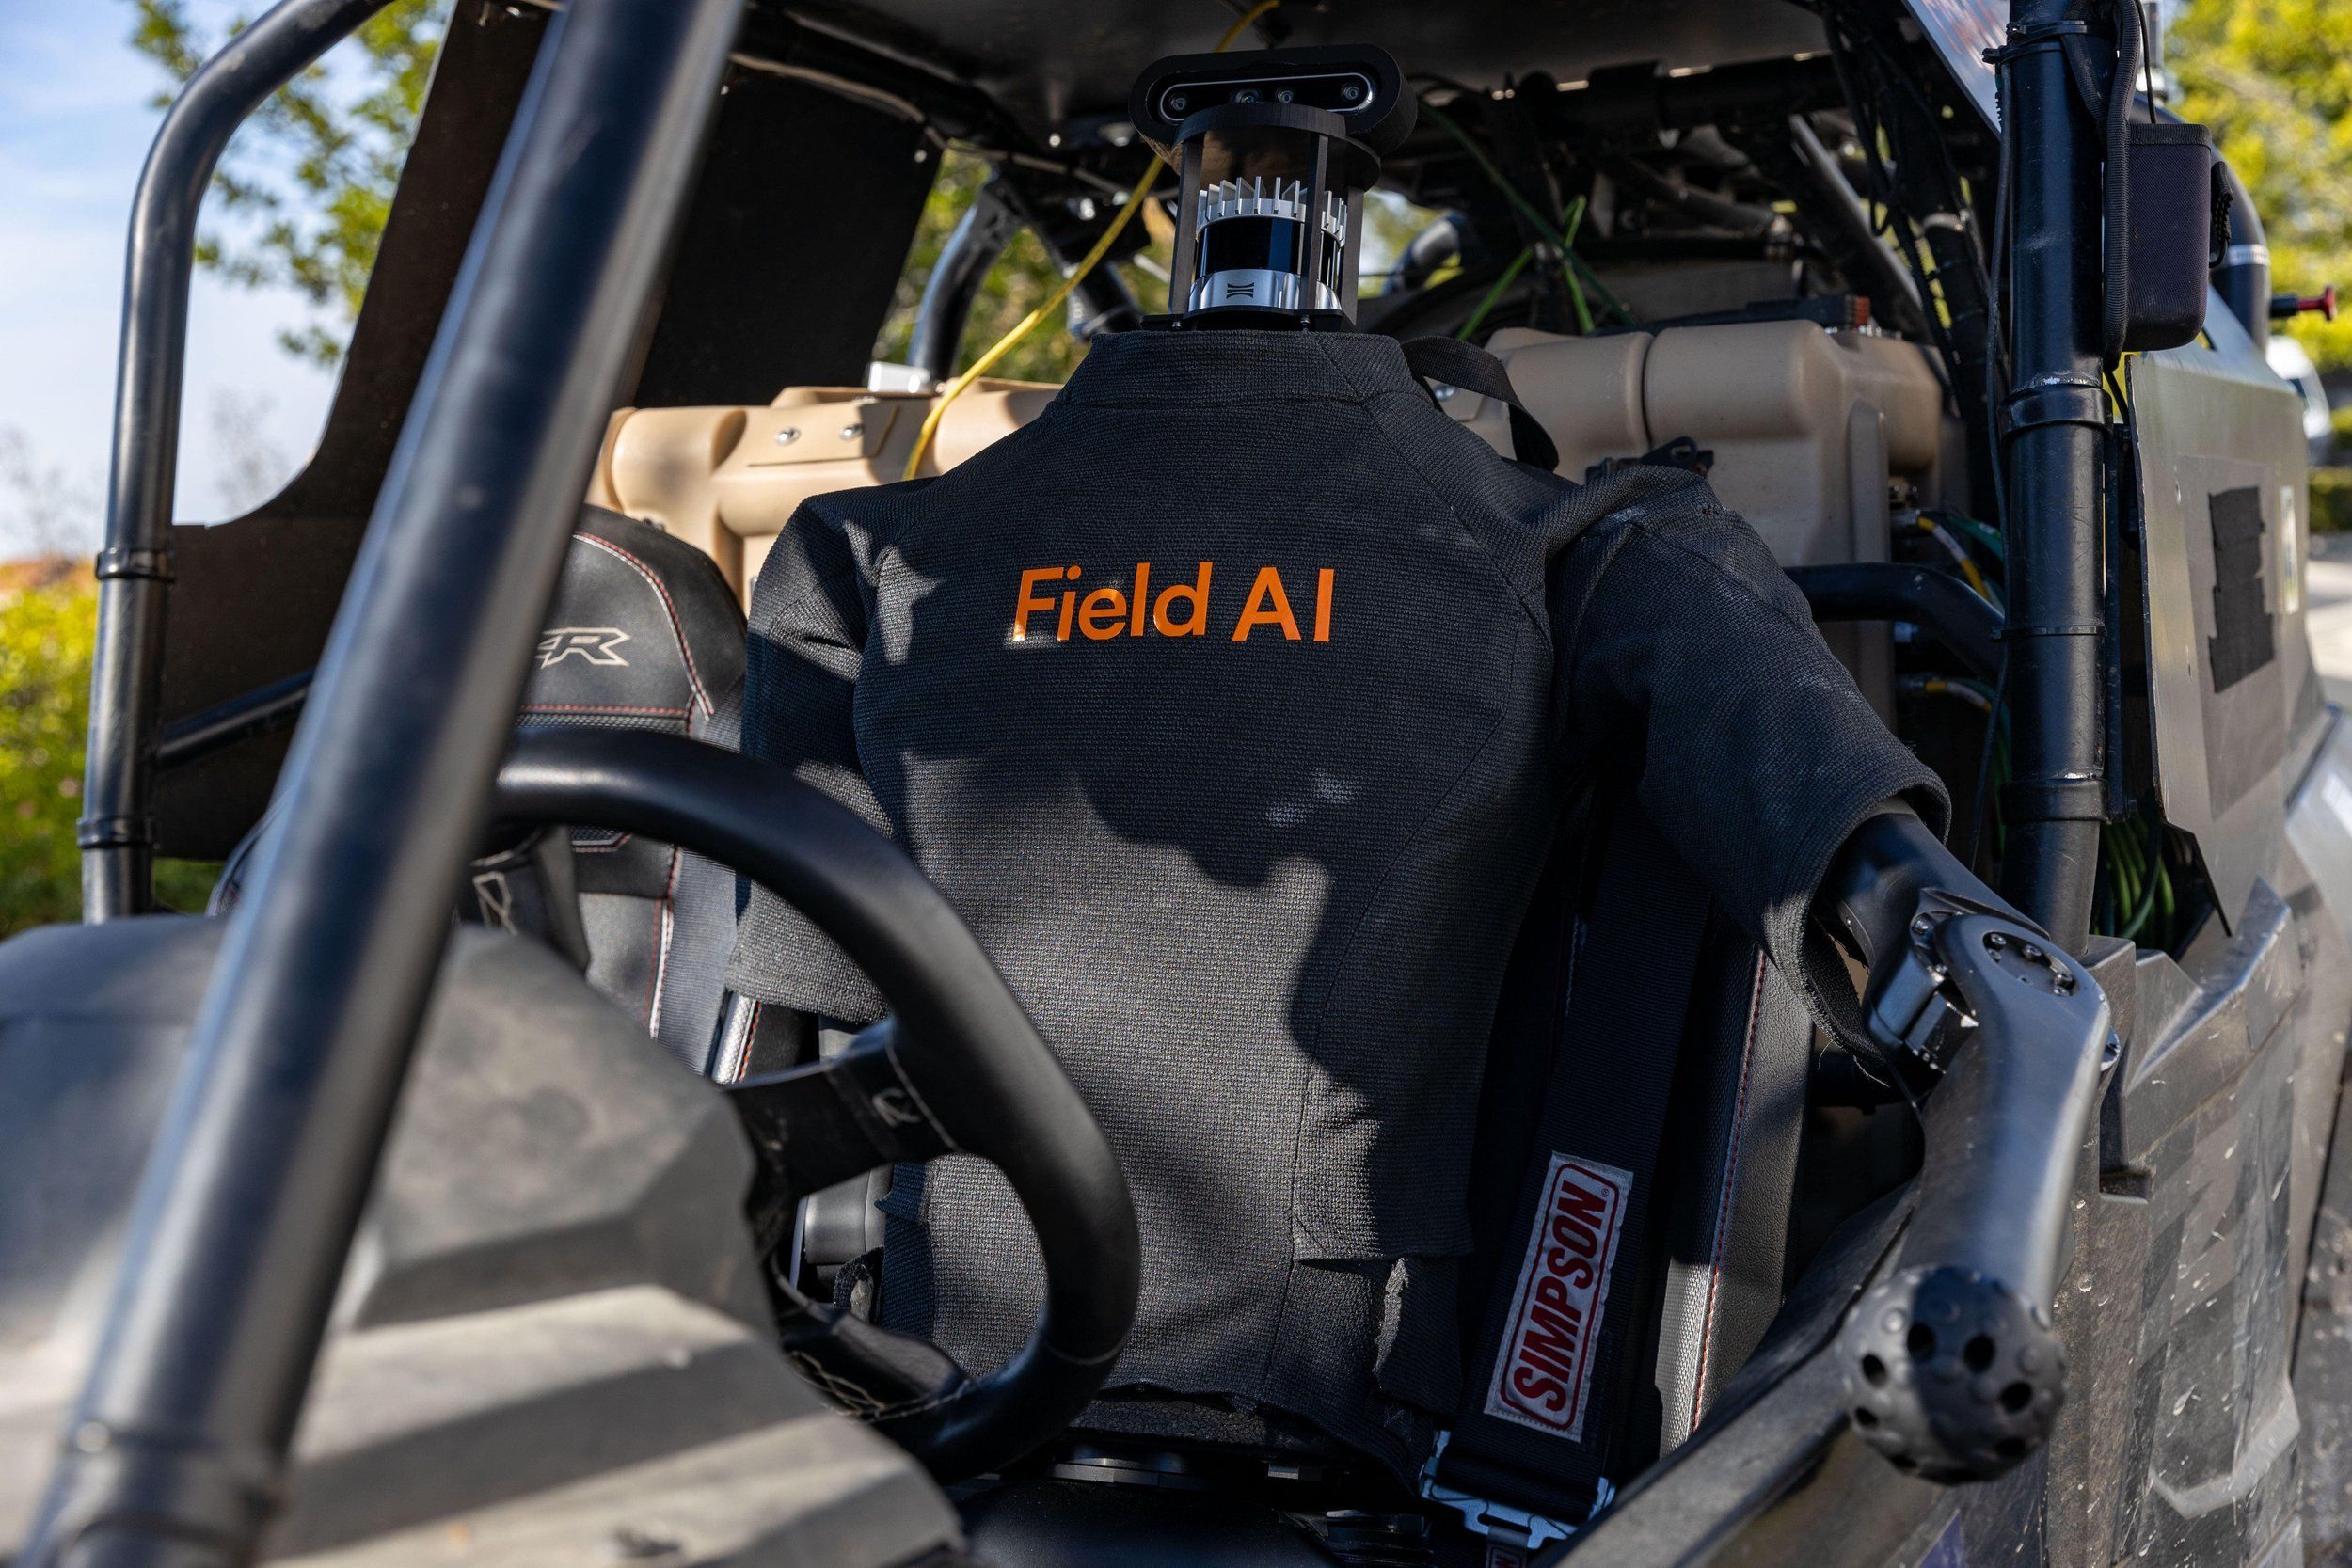 Human-like robot driver with a logo on its chest saying "Field AI" sits behind the wheel of an open, dune buggy-like vehicle